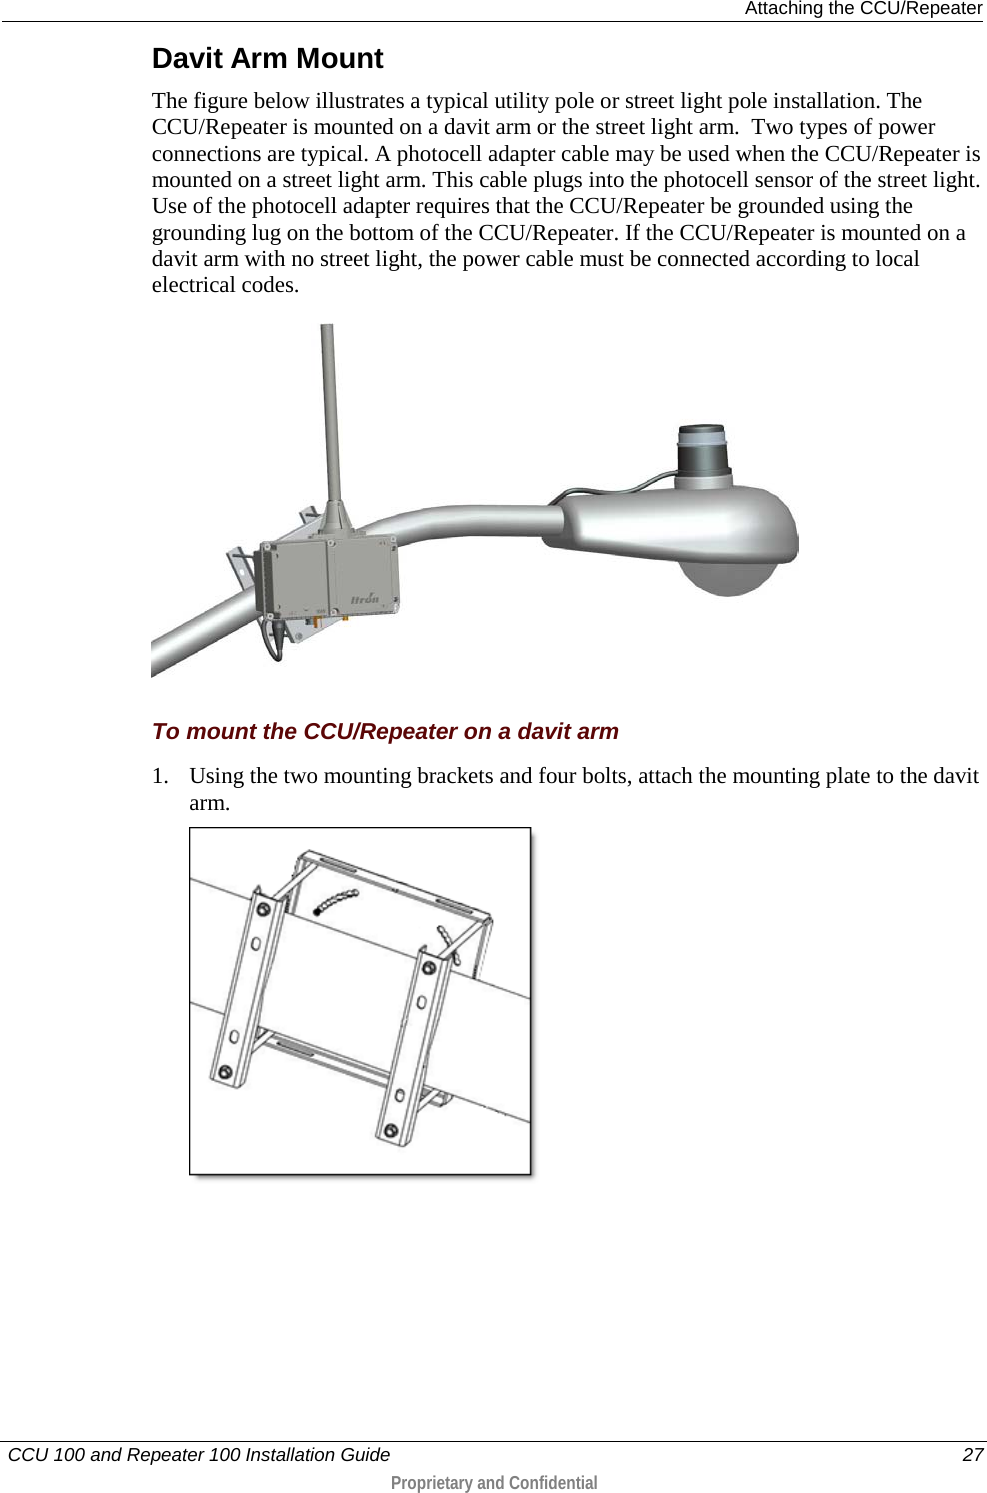  Attaching the CCU/Repeater   CCU 100 and Repeater 100 Installation Guide    27  Proprietary and Confidential  Davit Arm Mount The figure below illustrates a typical utility pole or street light pole installation. The CCU/Repeater is mounted on a davit arm or the street light arm.  Two types of power connections are typical. A photocell adapter cable may be used when the CCU/Repeater is mounted on a street light arm. This cable plugs into the photocell sensor of the street light. Use of the photocell adapter requires that the CCU/Repeater be grounded using the grounding lug on the bottom of the CCU/Repeater. If the CCU/Repeater is mounted on a davit arm with no street light, the power cable must be connected according to local electrical codes.     To mount the CCU/Repeater on a davit arm 1. Using the two mounting brackets and four bolts, attach the mounting plate to the davit arm.  